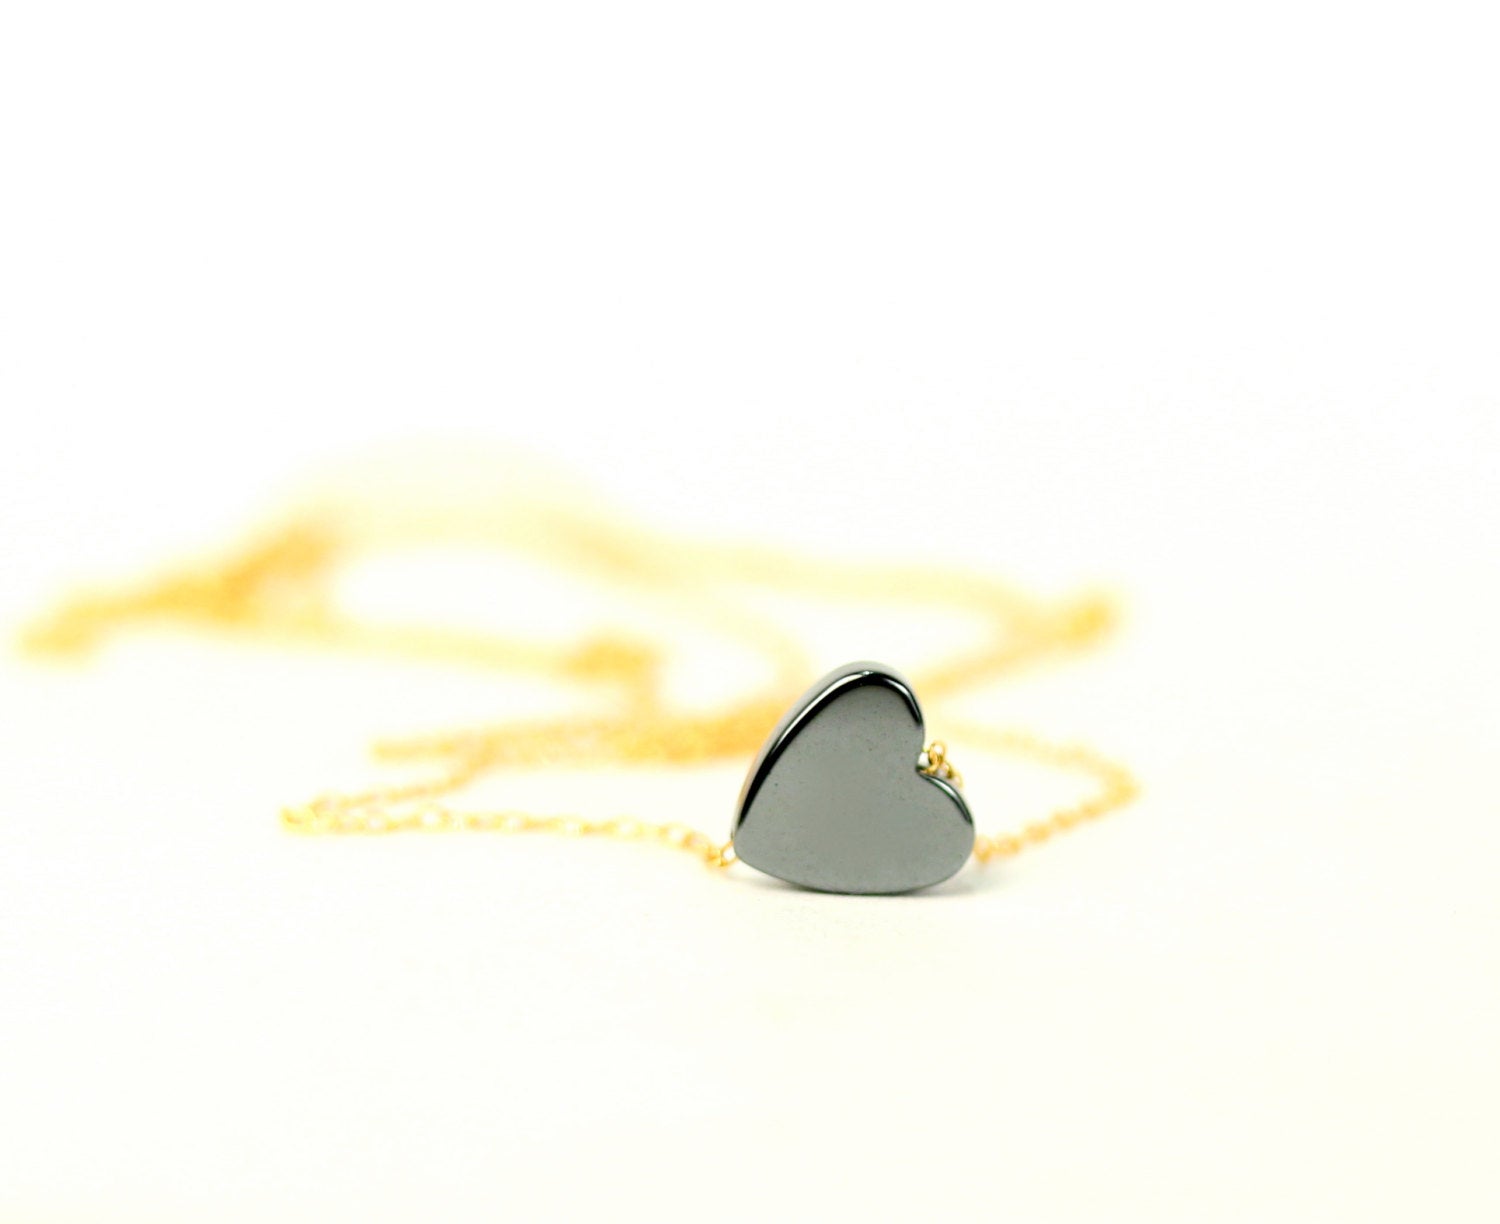 Heart Necklace - Hematite Necklace - Tiny Heart Charm - Horizontal Necklace - A Little Heart On A 14k Gold Vermeil Or Sterling Silver Chain